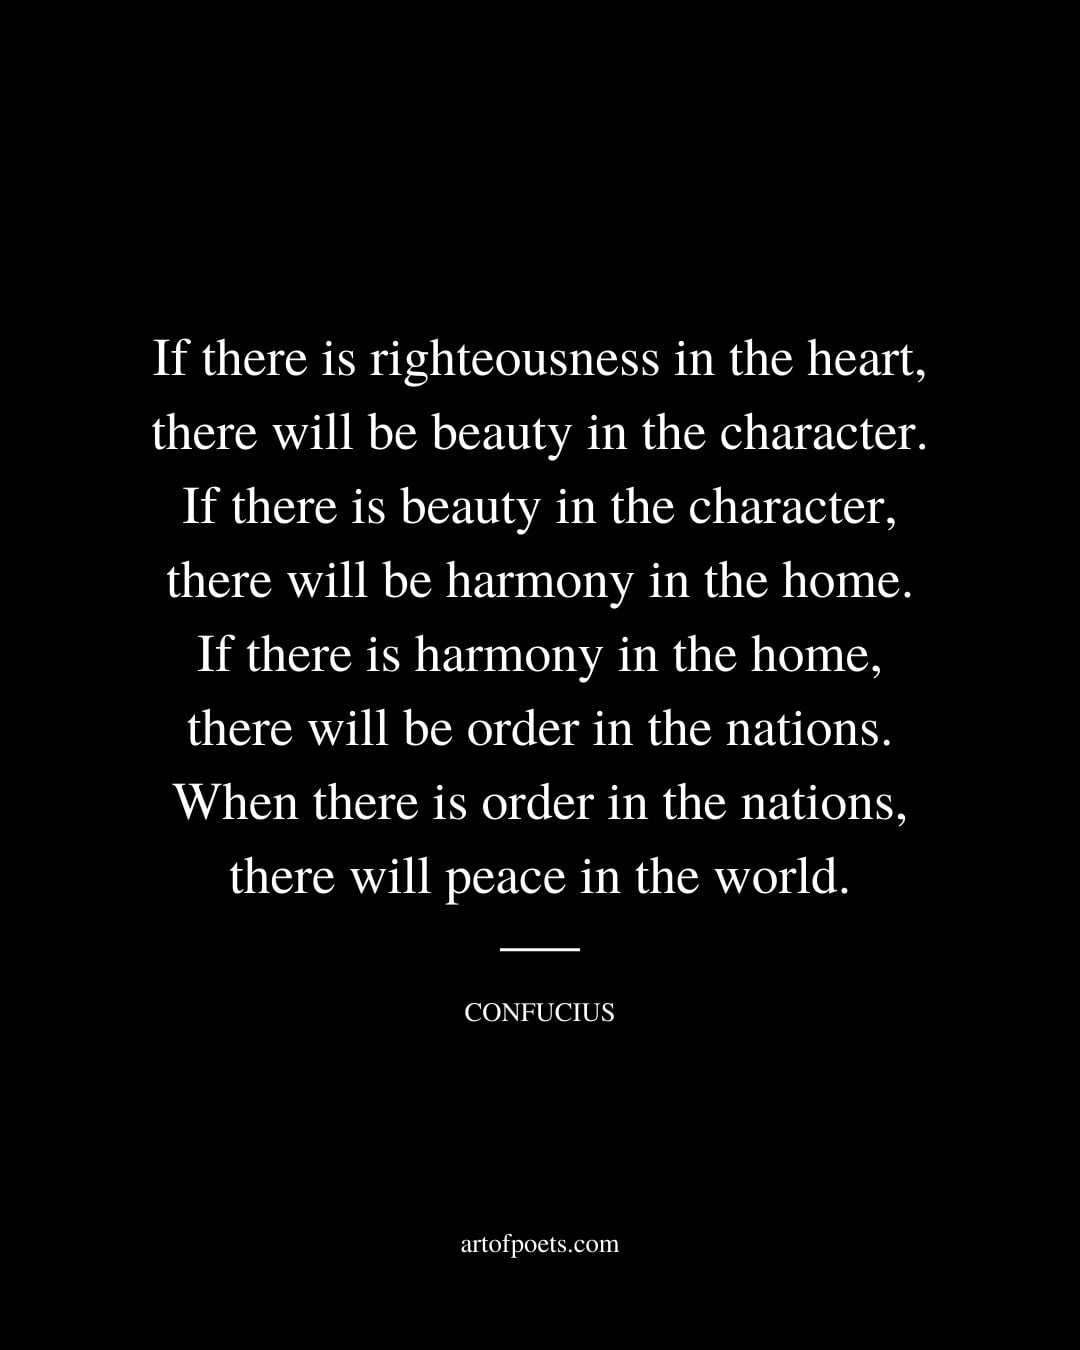 If there is righteousness in the heart there will be beauty in the character. If there is beauty in the character